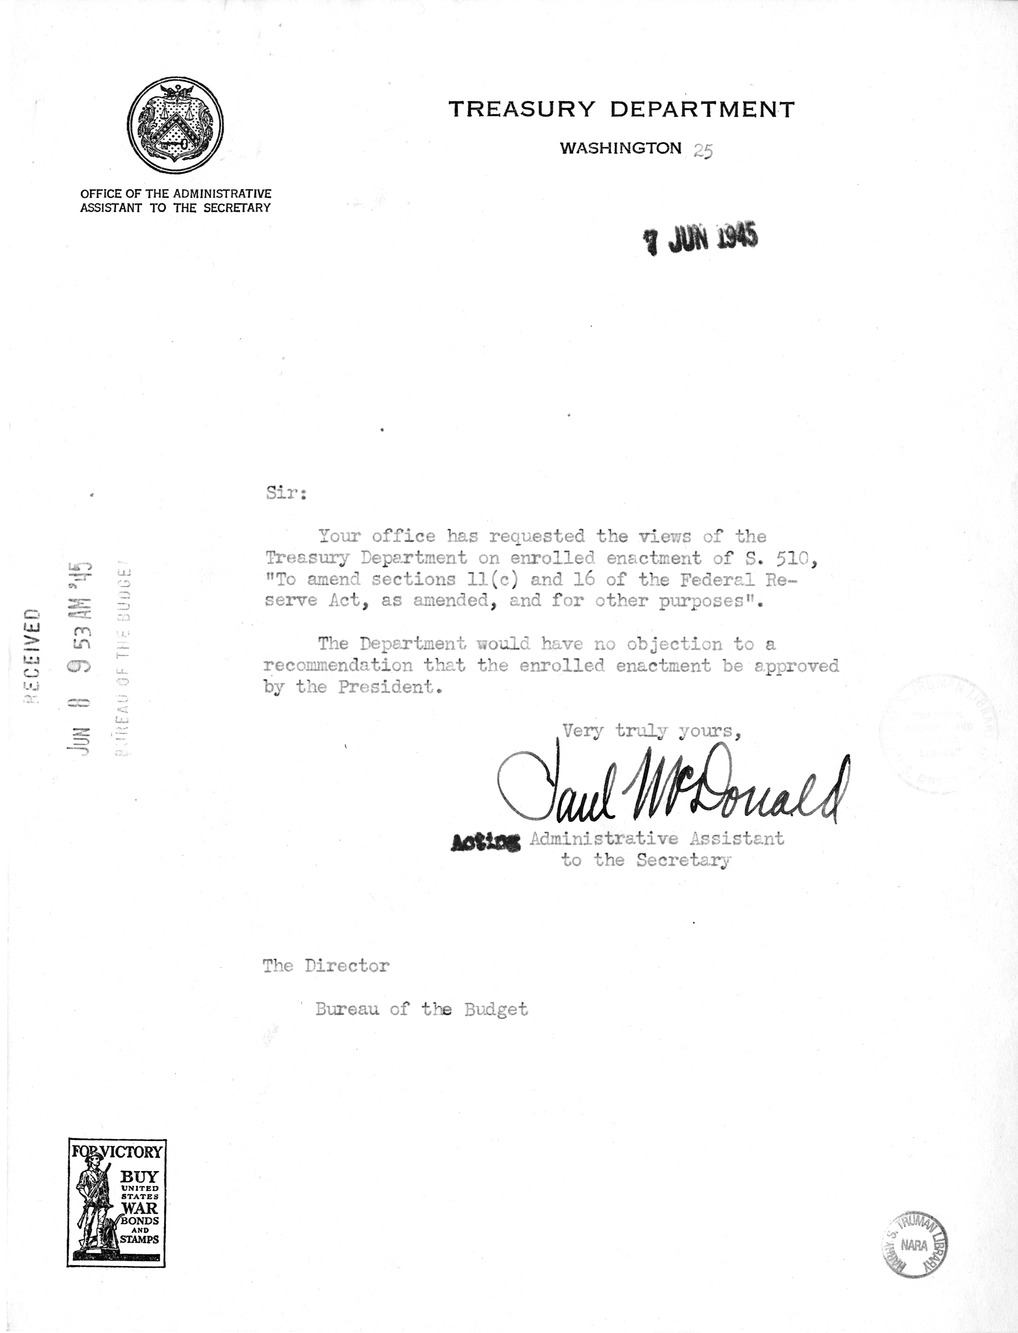 Memorandum from Harold D. Smith to M. C. Latta, S. 510, To Amend Sections 11(c) and 16 of the Federal Reserve Act, as Amended, and for Other Purposes, with Attachments